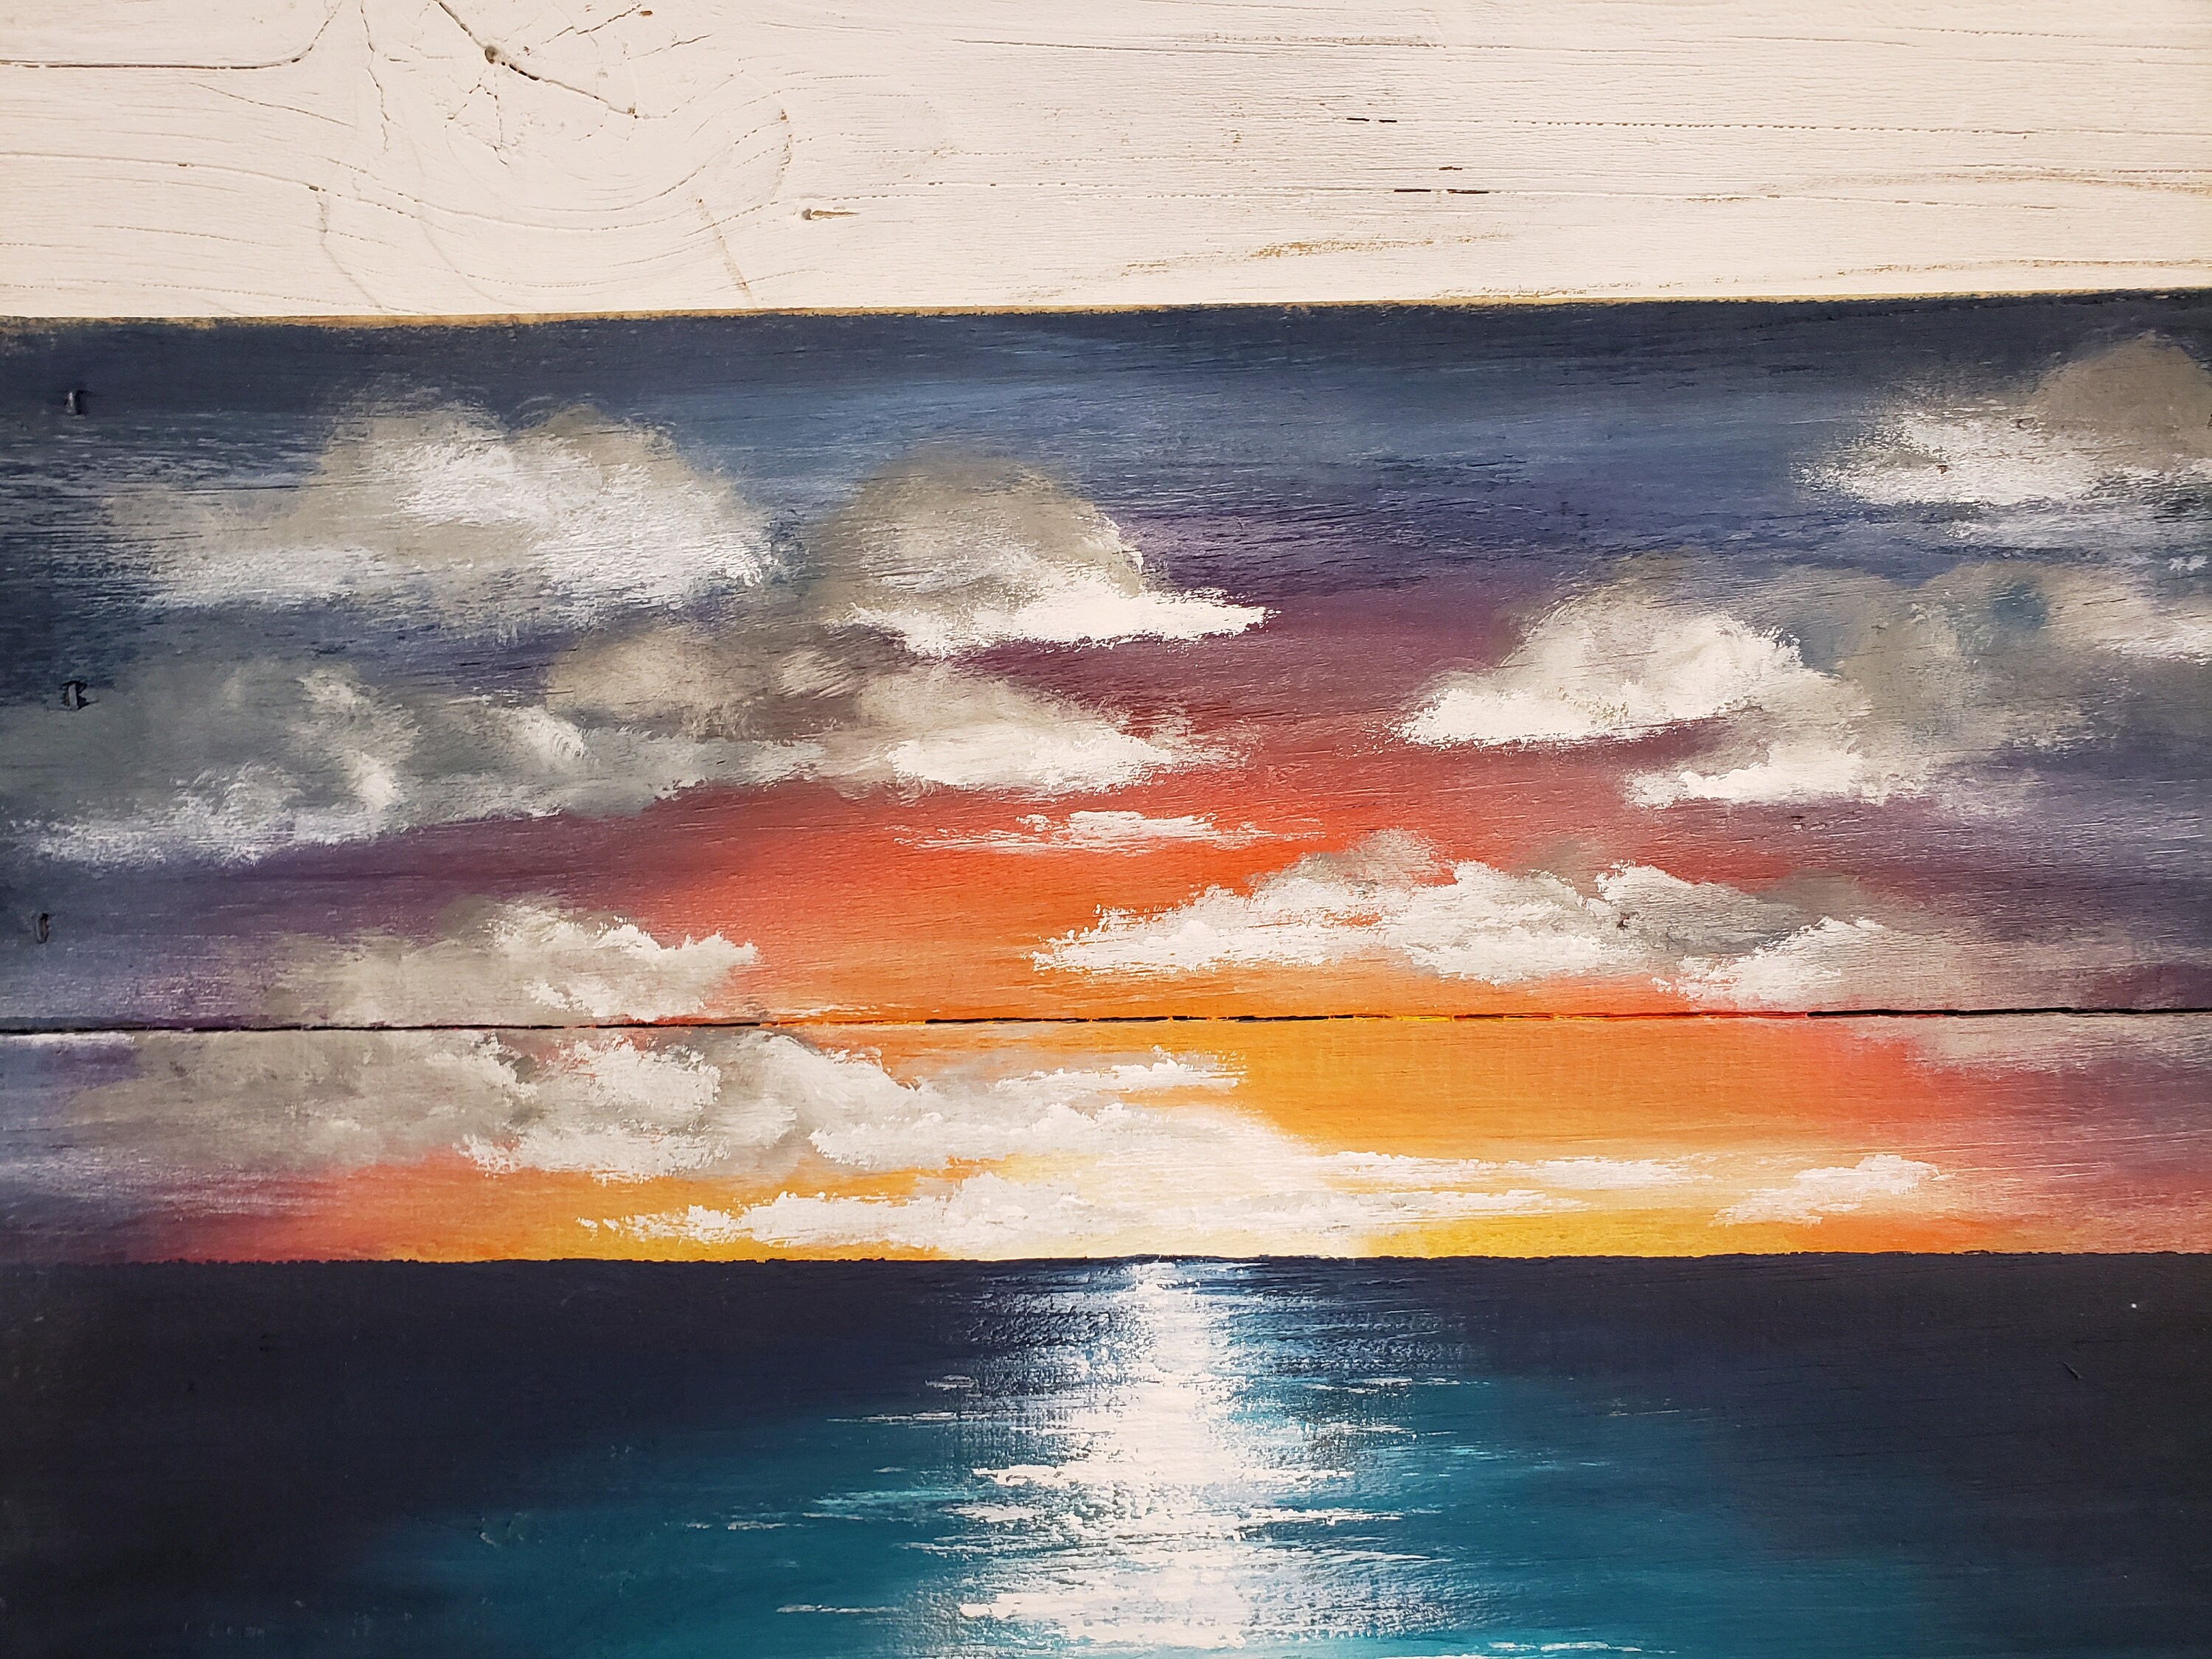 Beach Sunset Painting, Acrylic Painting on Pallet Wood, Reclaimed